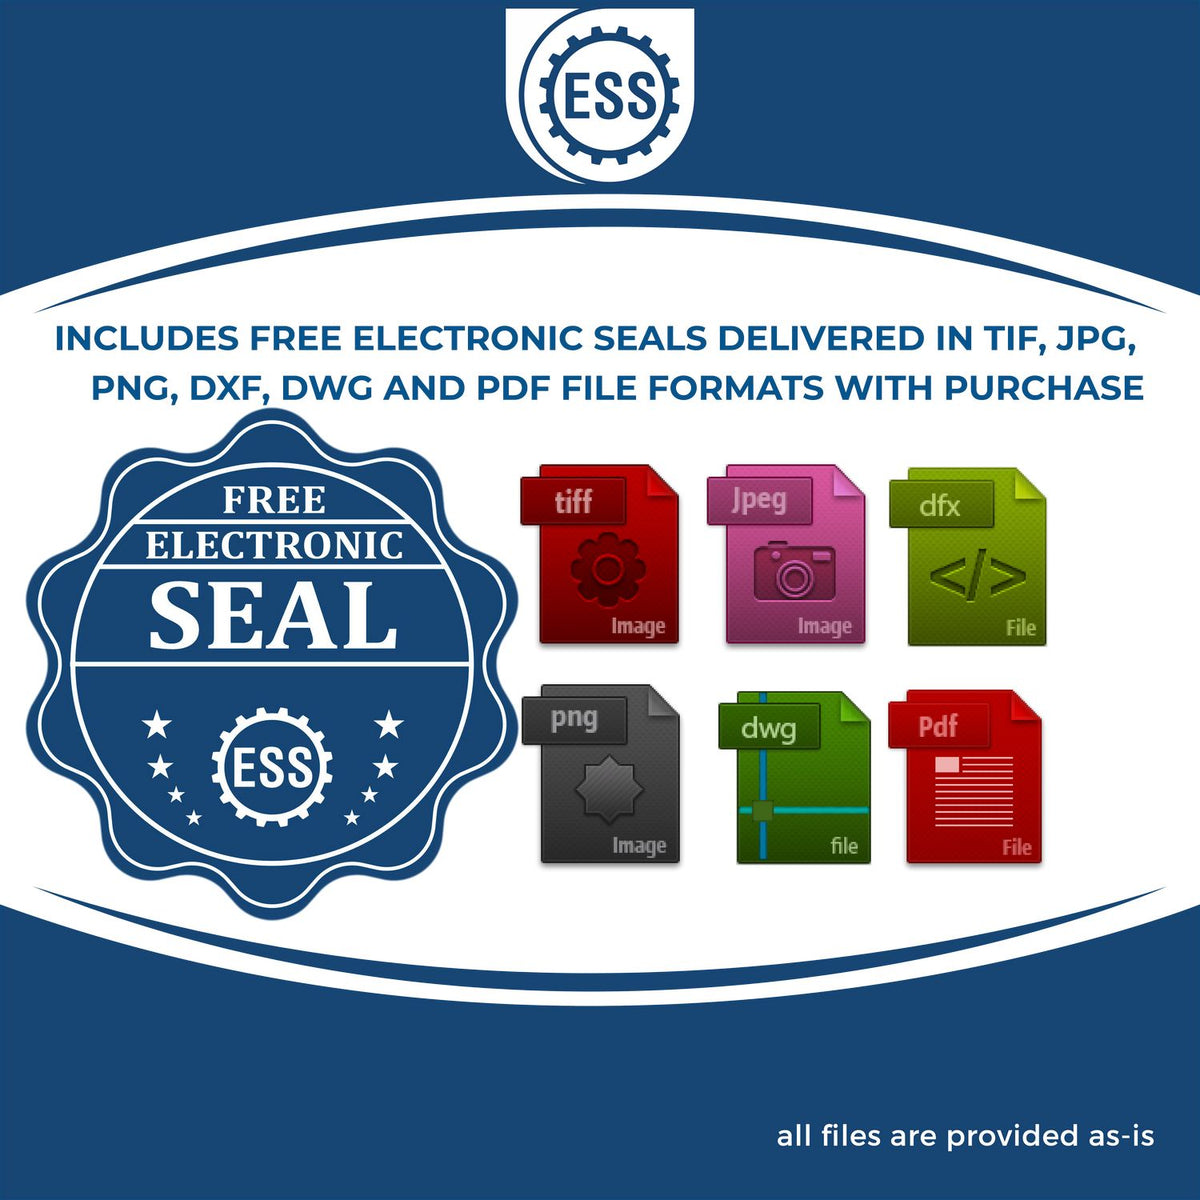 An infographic for the free electronic seal for the Hybrid Nebraska Architect Seal illustrating the different file type icons such as DXF, DWG, TIF, JPG and PNG.